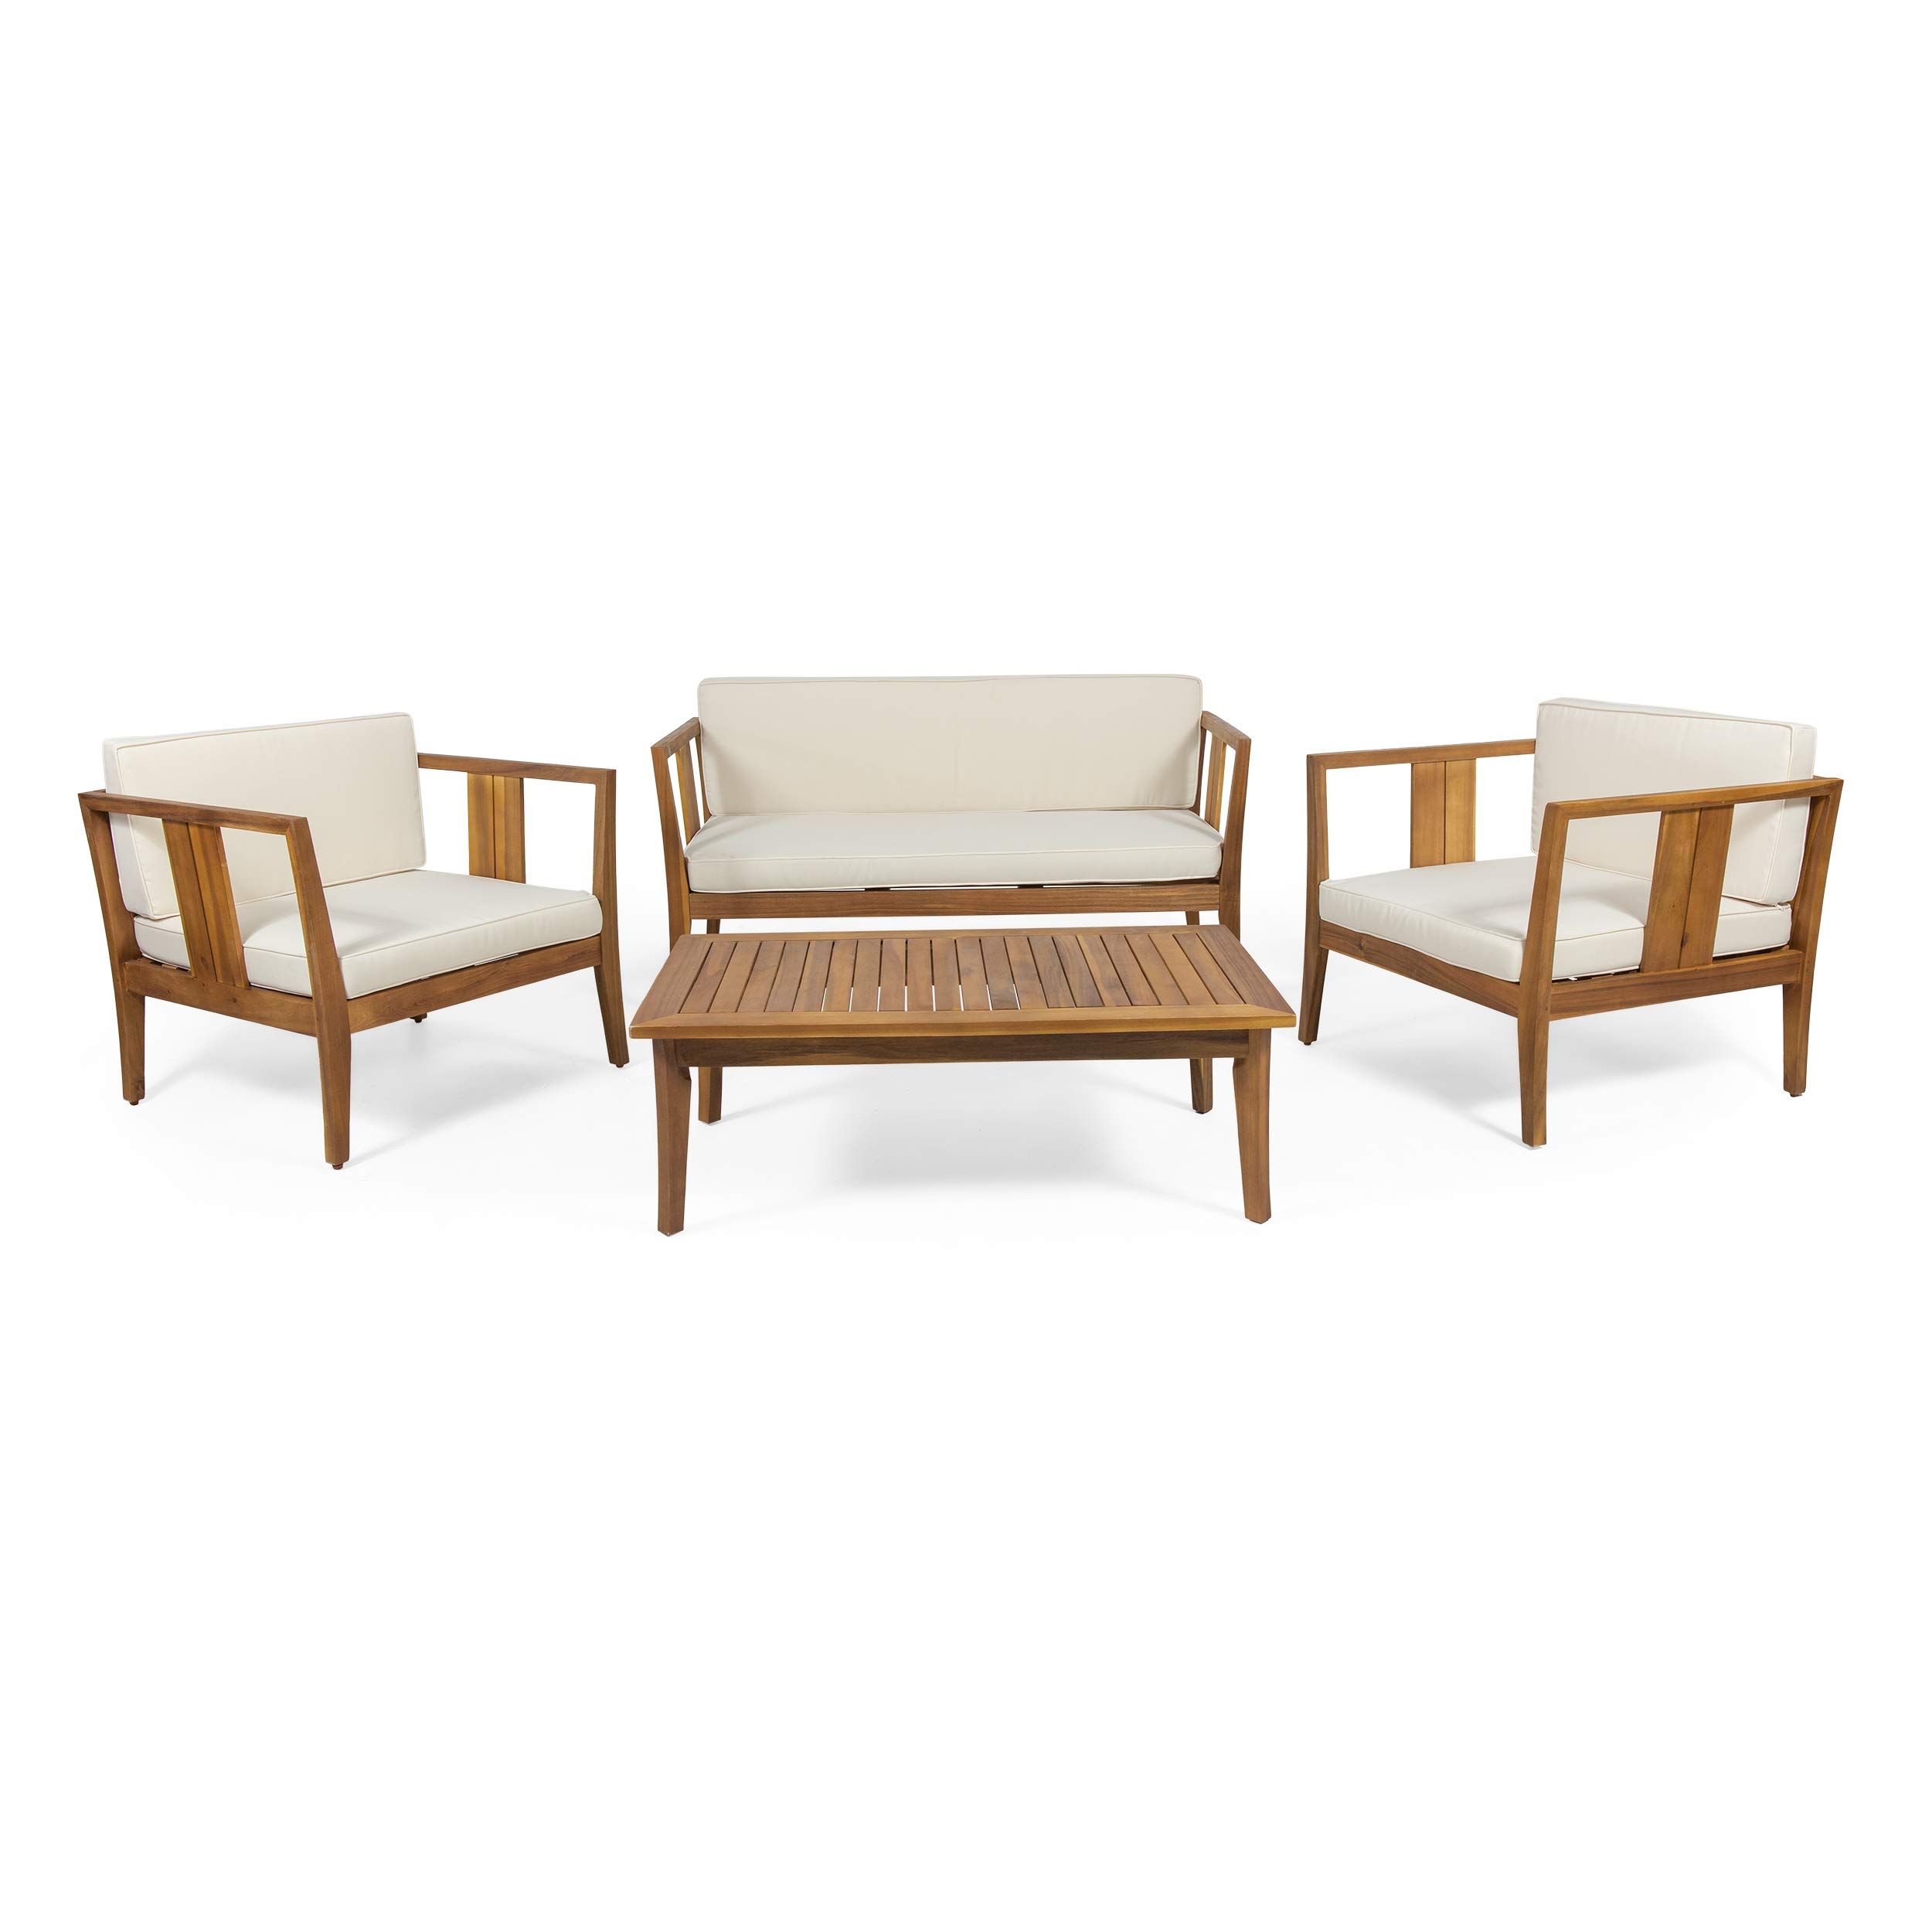 Christopher Knight Home Beatrice Outdoor 4 Seater Acacia Wood Chat Set, Teak and Beige | Amazon (US)